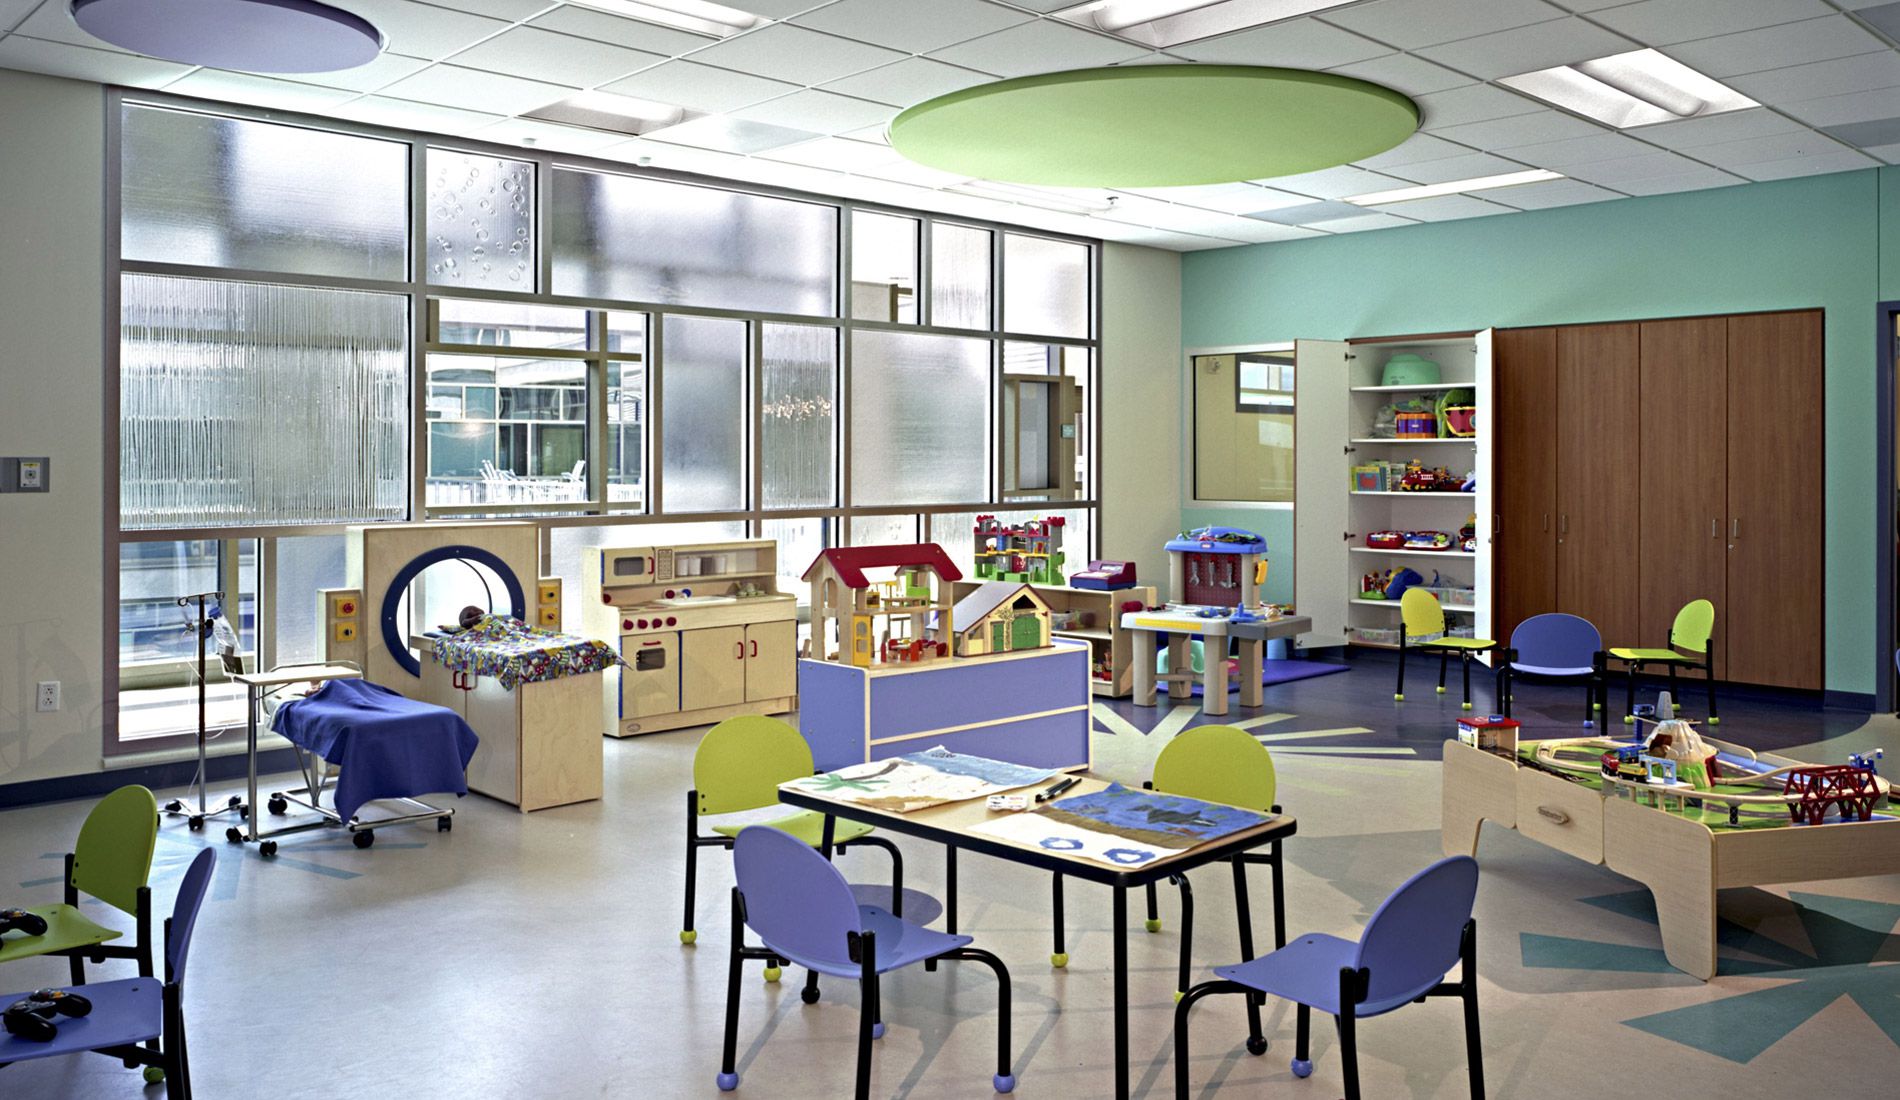 Dell Children's Medical Center of Central Texas | White Construction Company